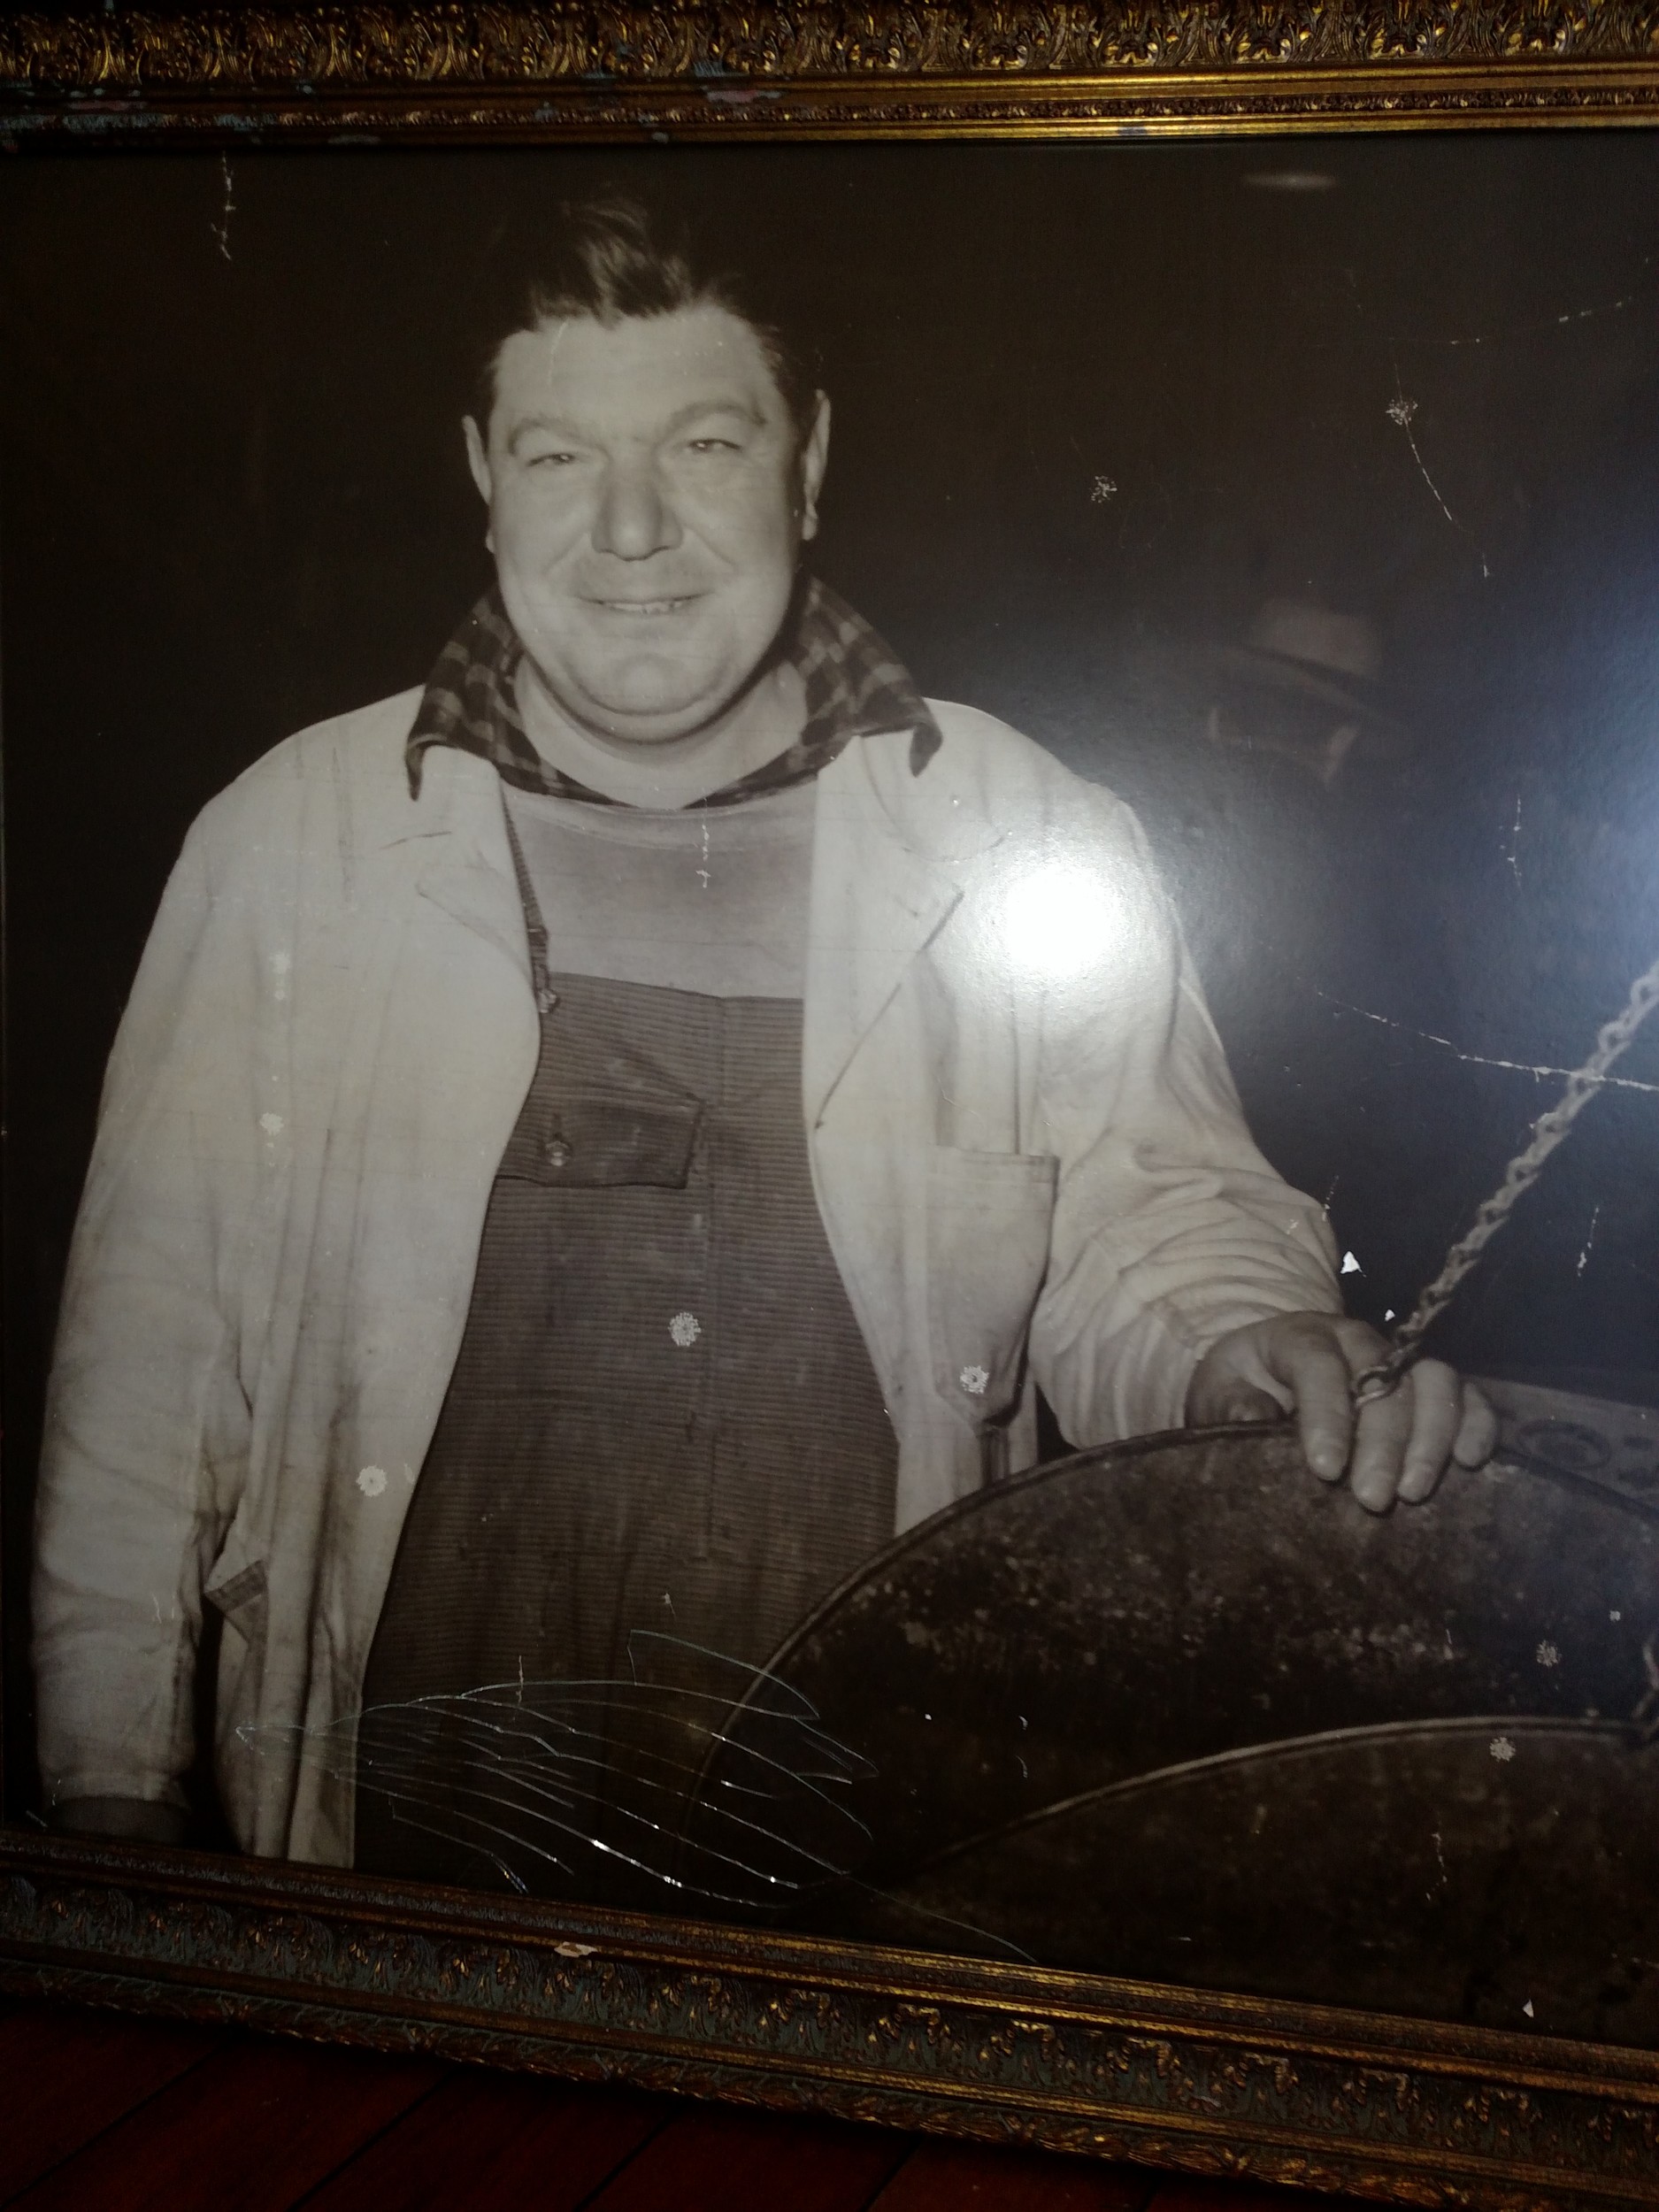 Anthony LaRocca, the real Paddy McGee. This  portrait hung in the restaurant for many years.